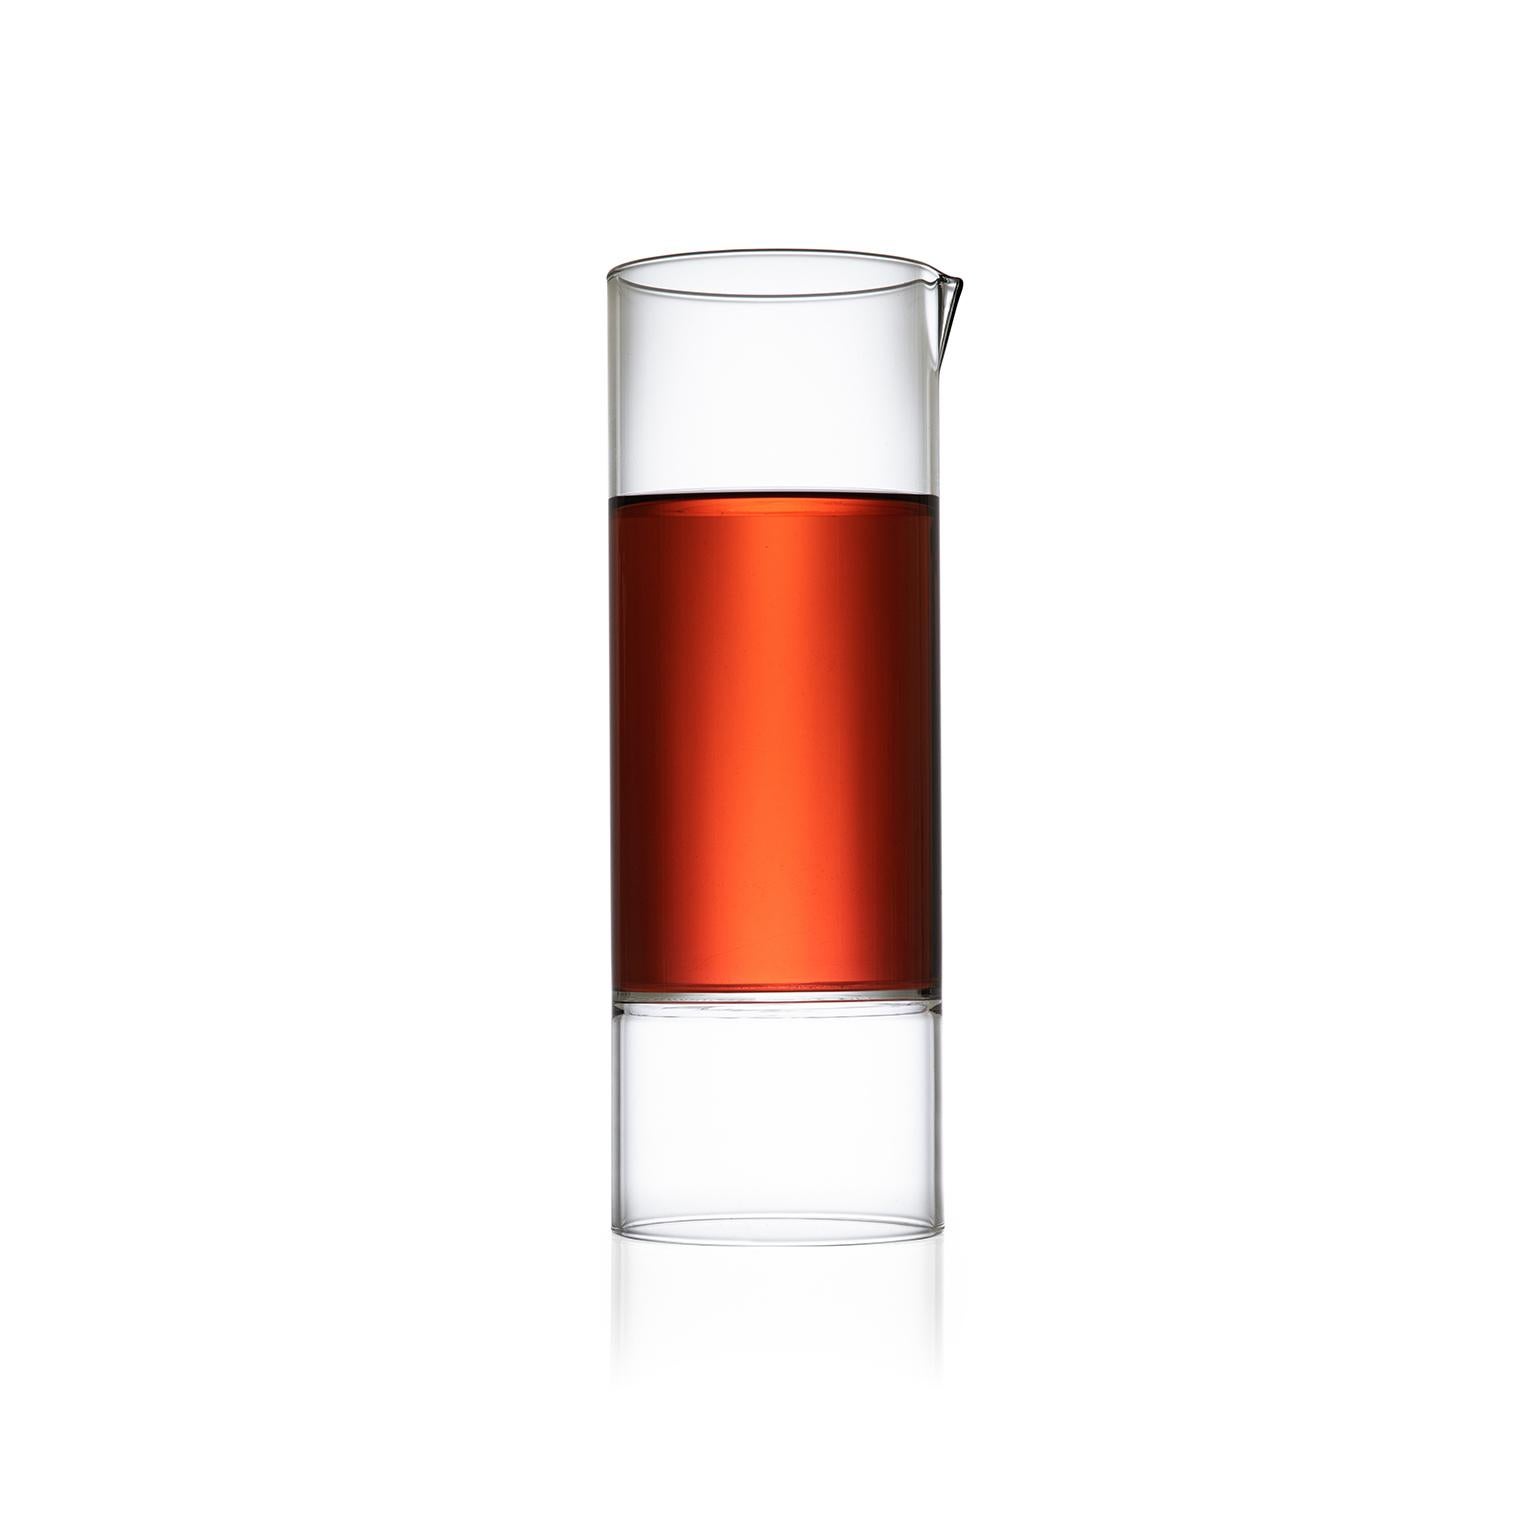 Revolution Carafe

This item is also available in the US.

Strikingly simple in form, the contemporary minimal Revolution collection is handcrafted in the Czech Republic by master glassblowers, and formed from a pure extrusion of hand blown